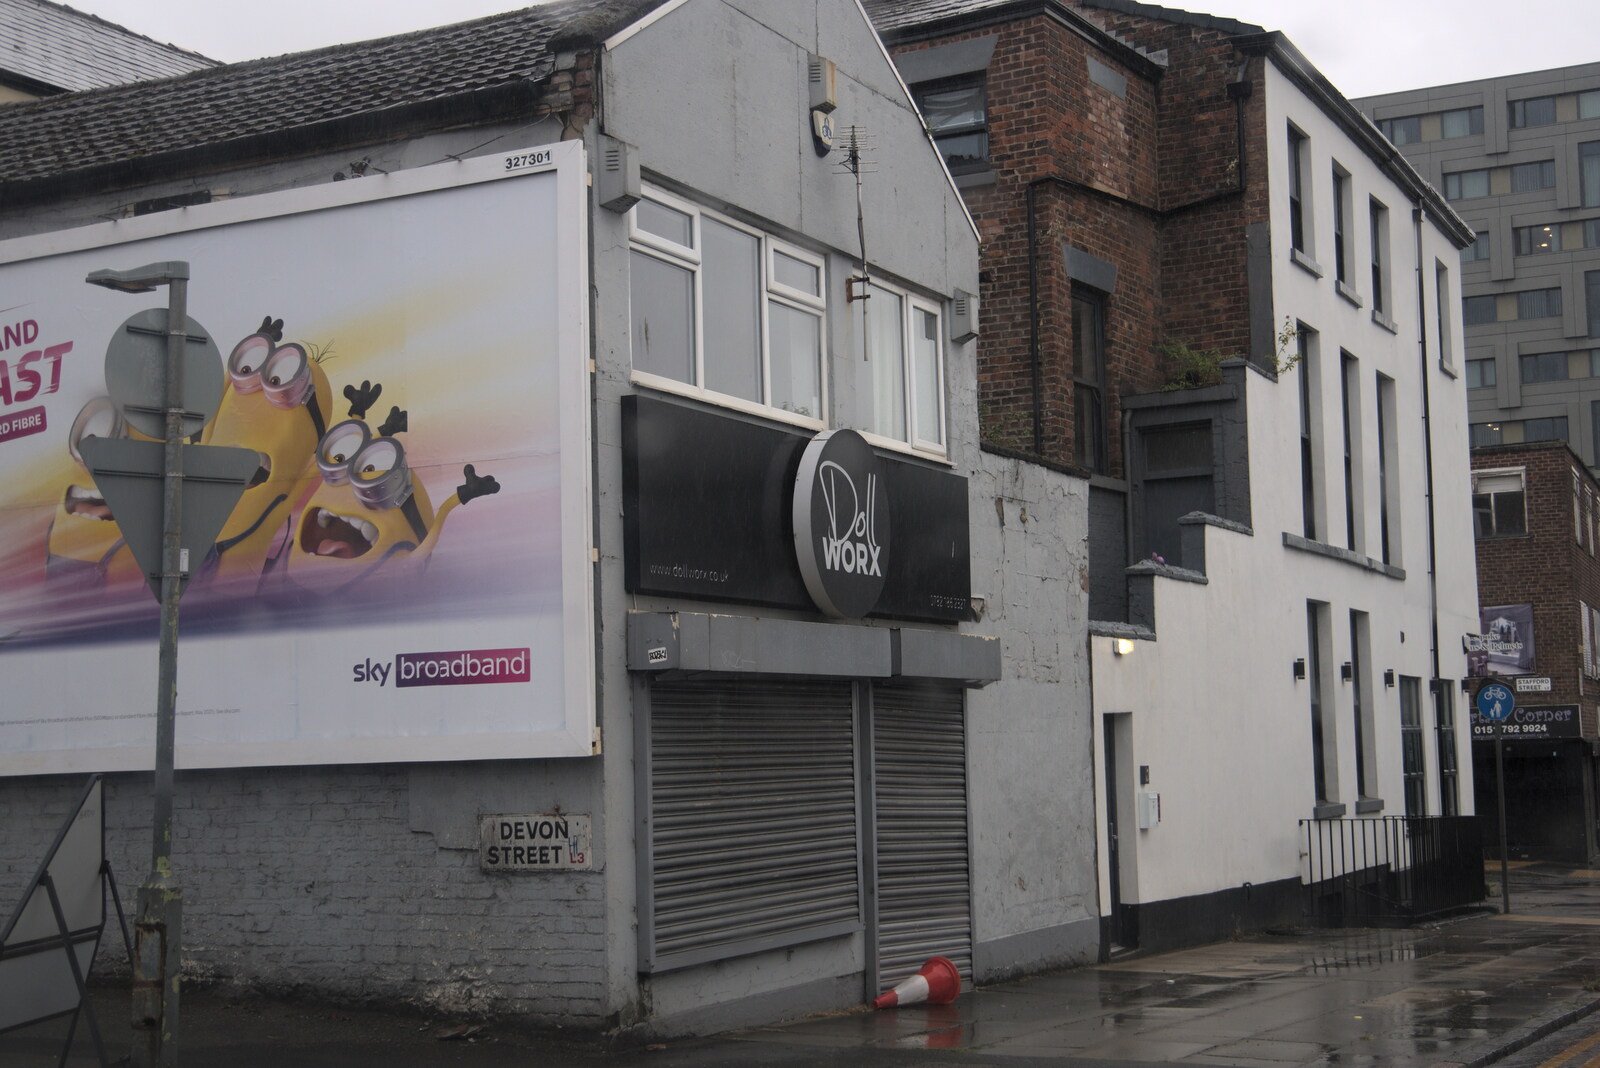 A derelict shop on Devon Street from Pork Pies and Dockside Dereliction, Melton Mowbray and Liverpool - 7th August 2021